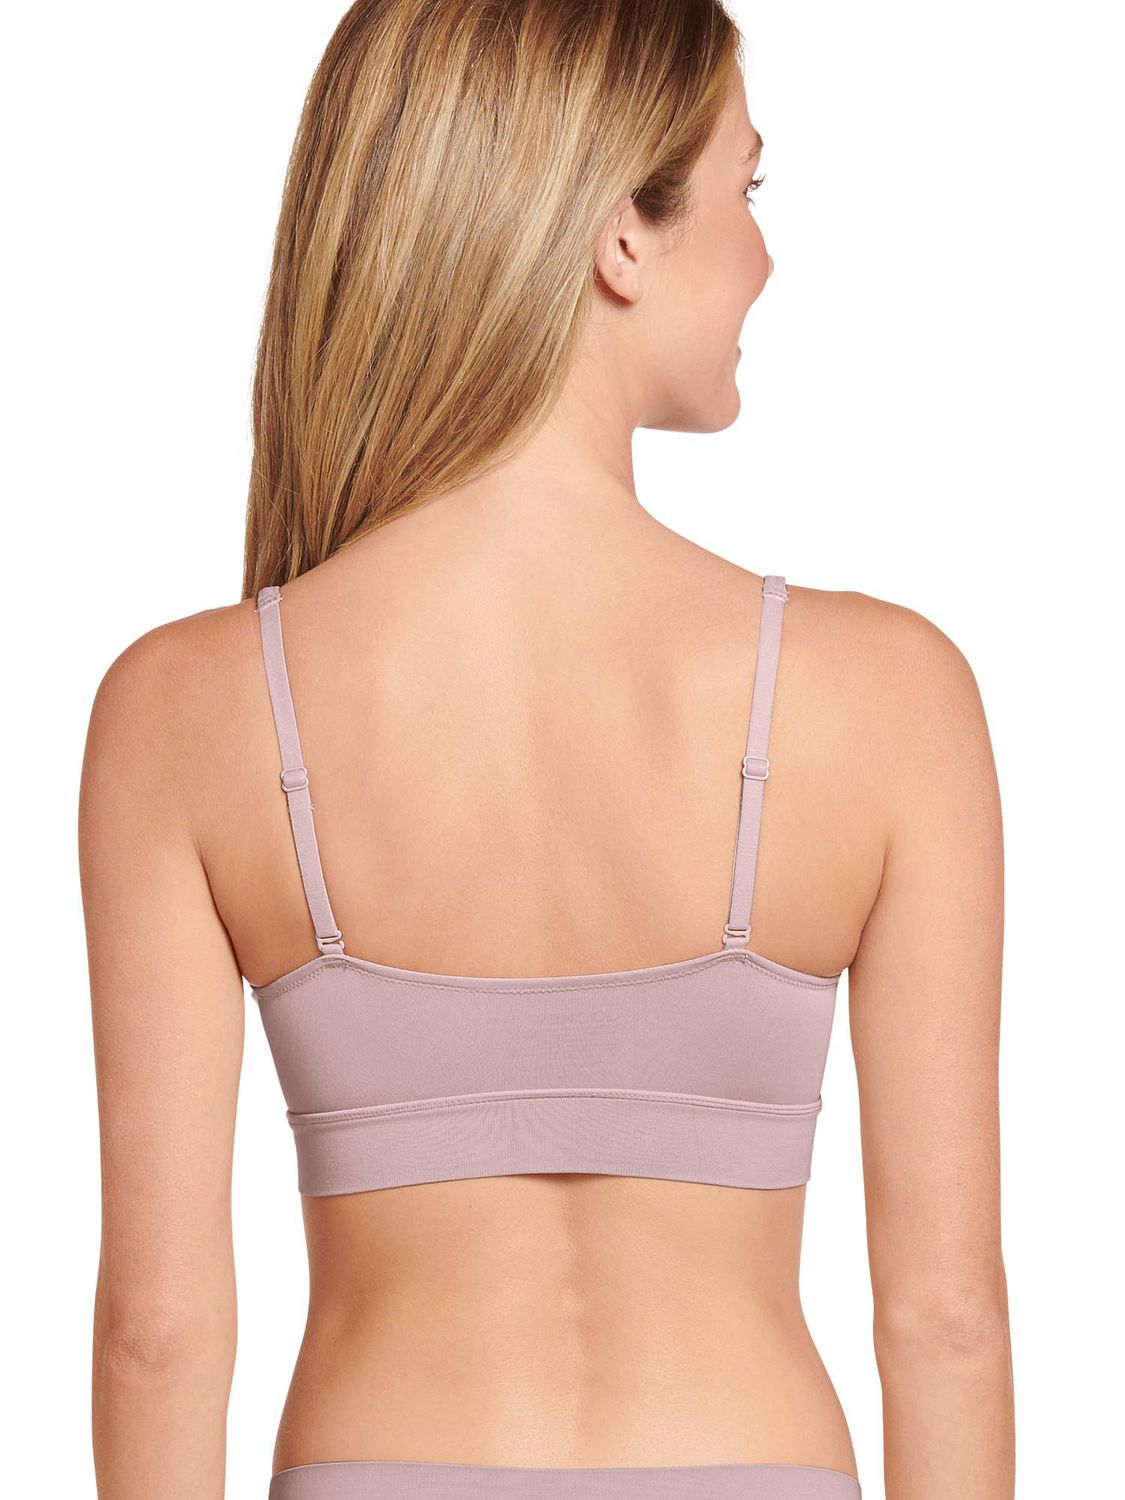 Buy Jockey Double Layered Wirefree Shaper Bra - Teal at Rs.579 online